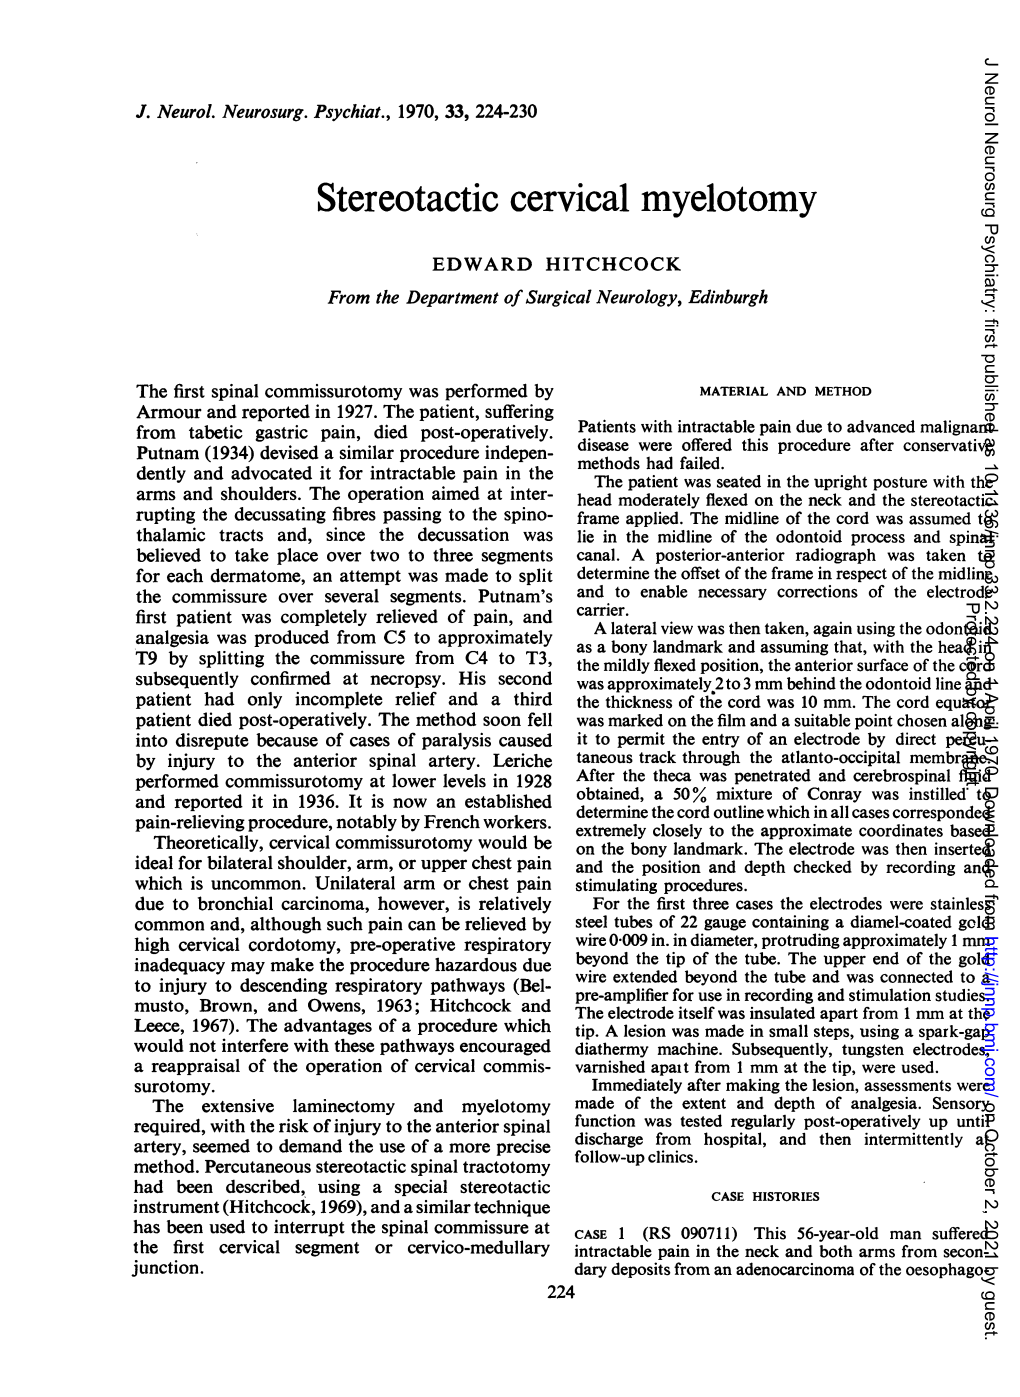 Stereotactic Cervical Myelotomy